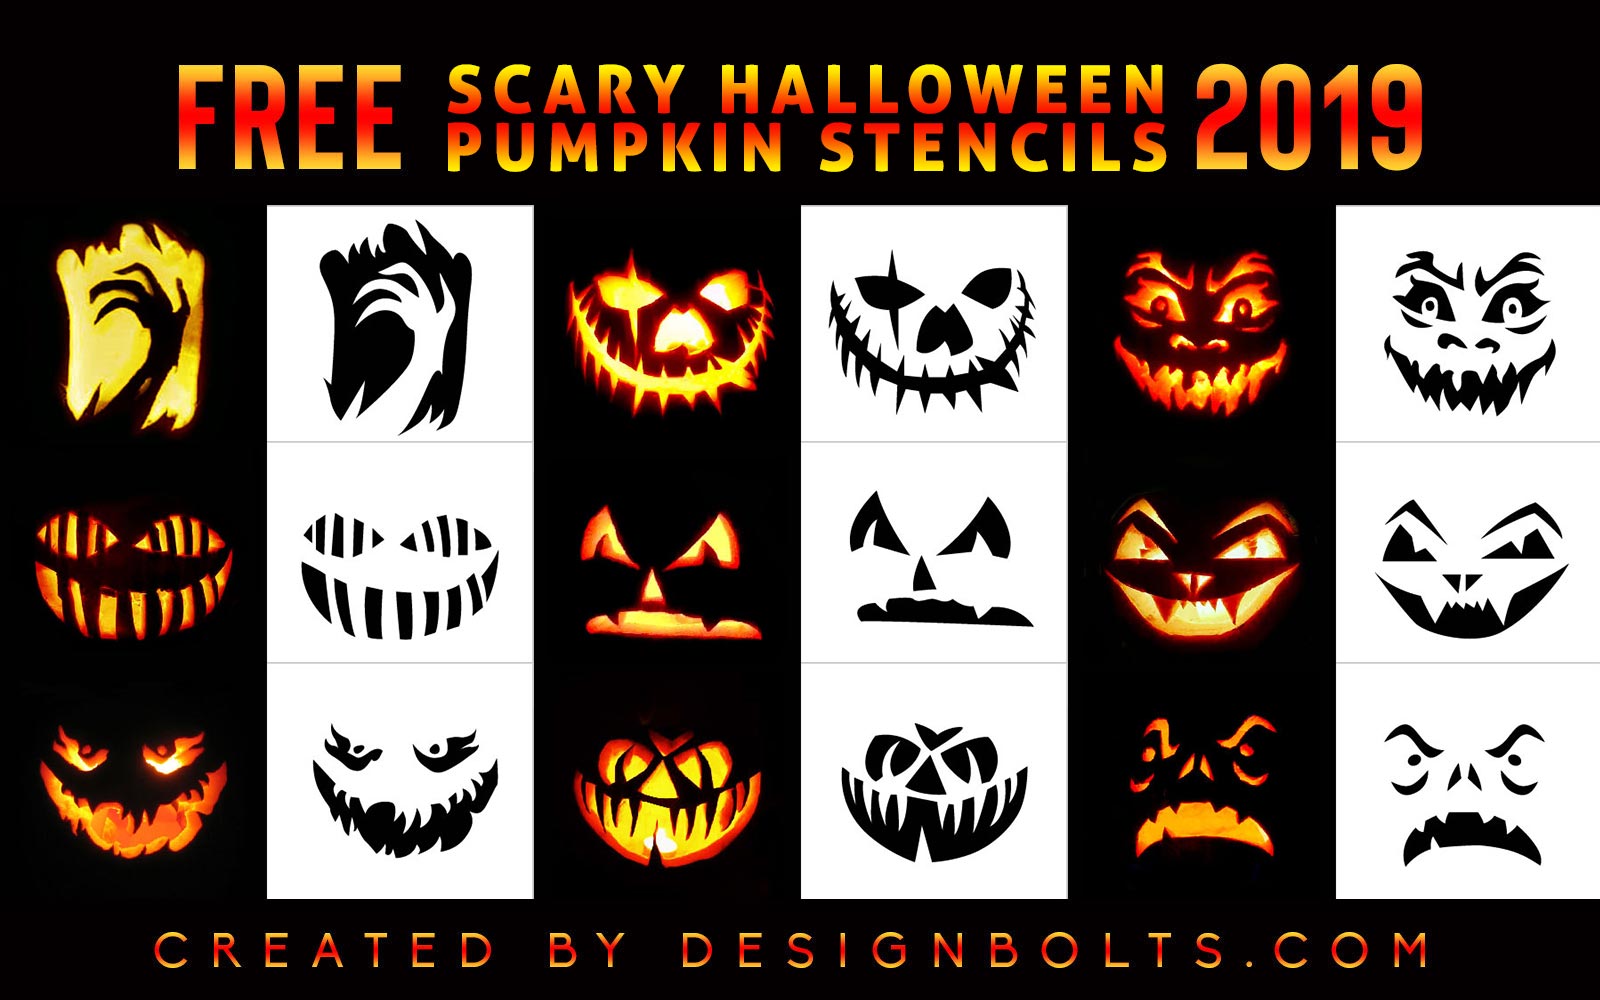 10 More Free Scary Halloween Pumpkin Carving Stencils, Patterns, Faces ...